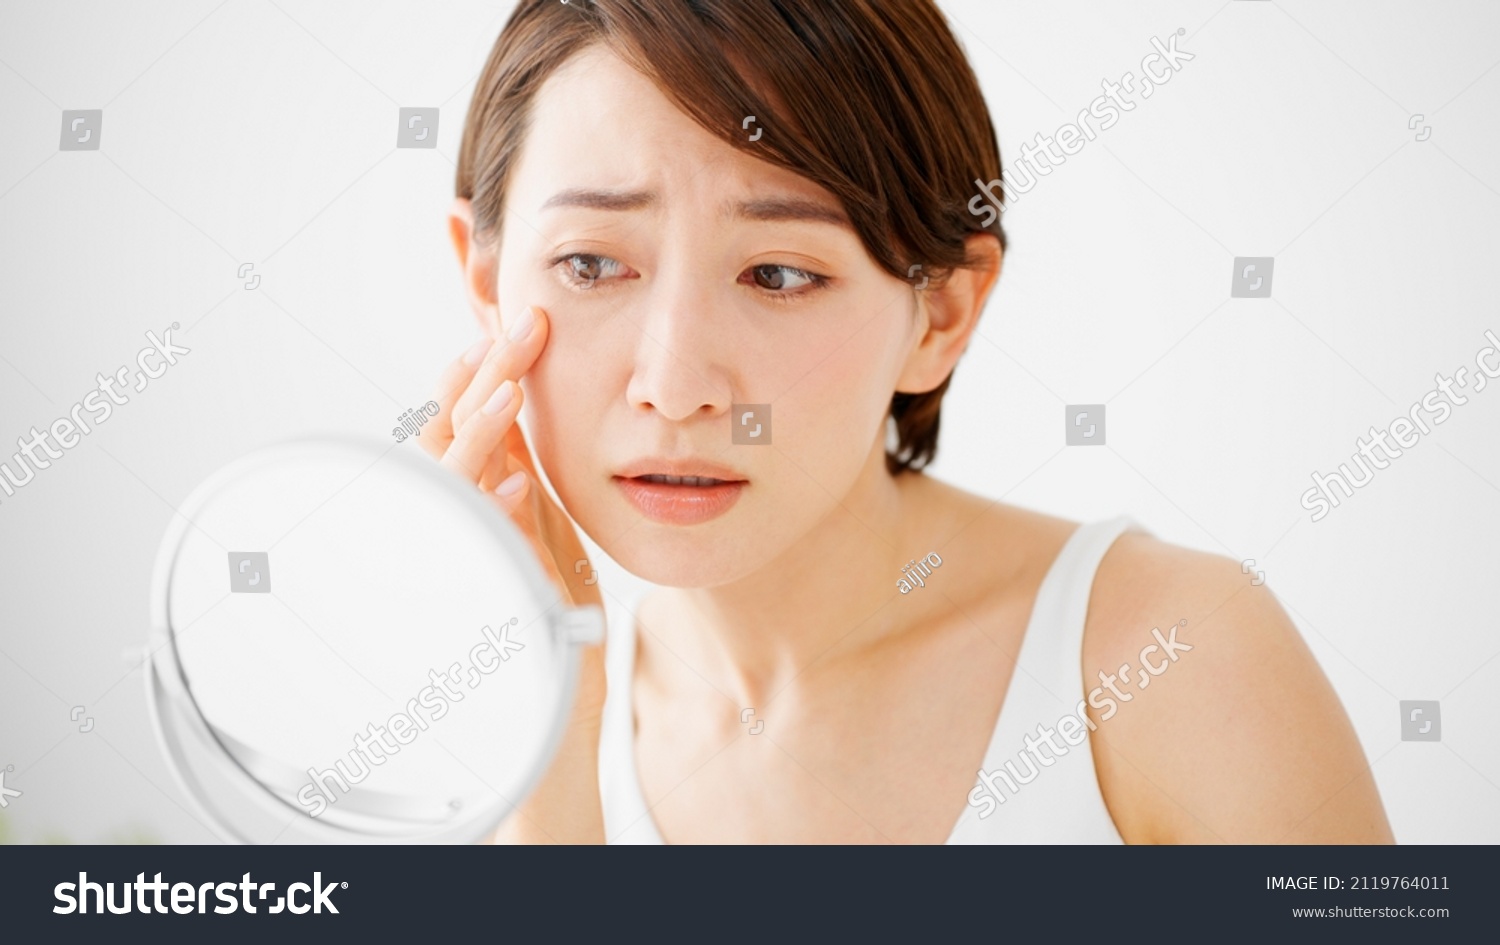 Beauty Image of young woman taking care of her skin #2119764011